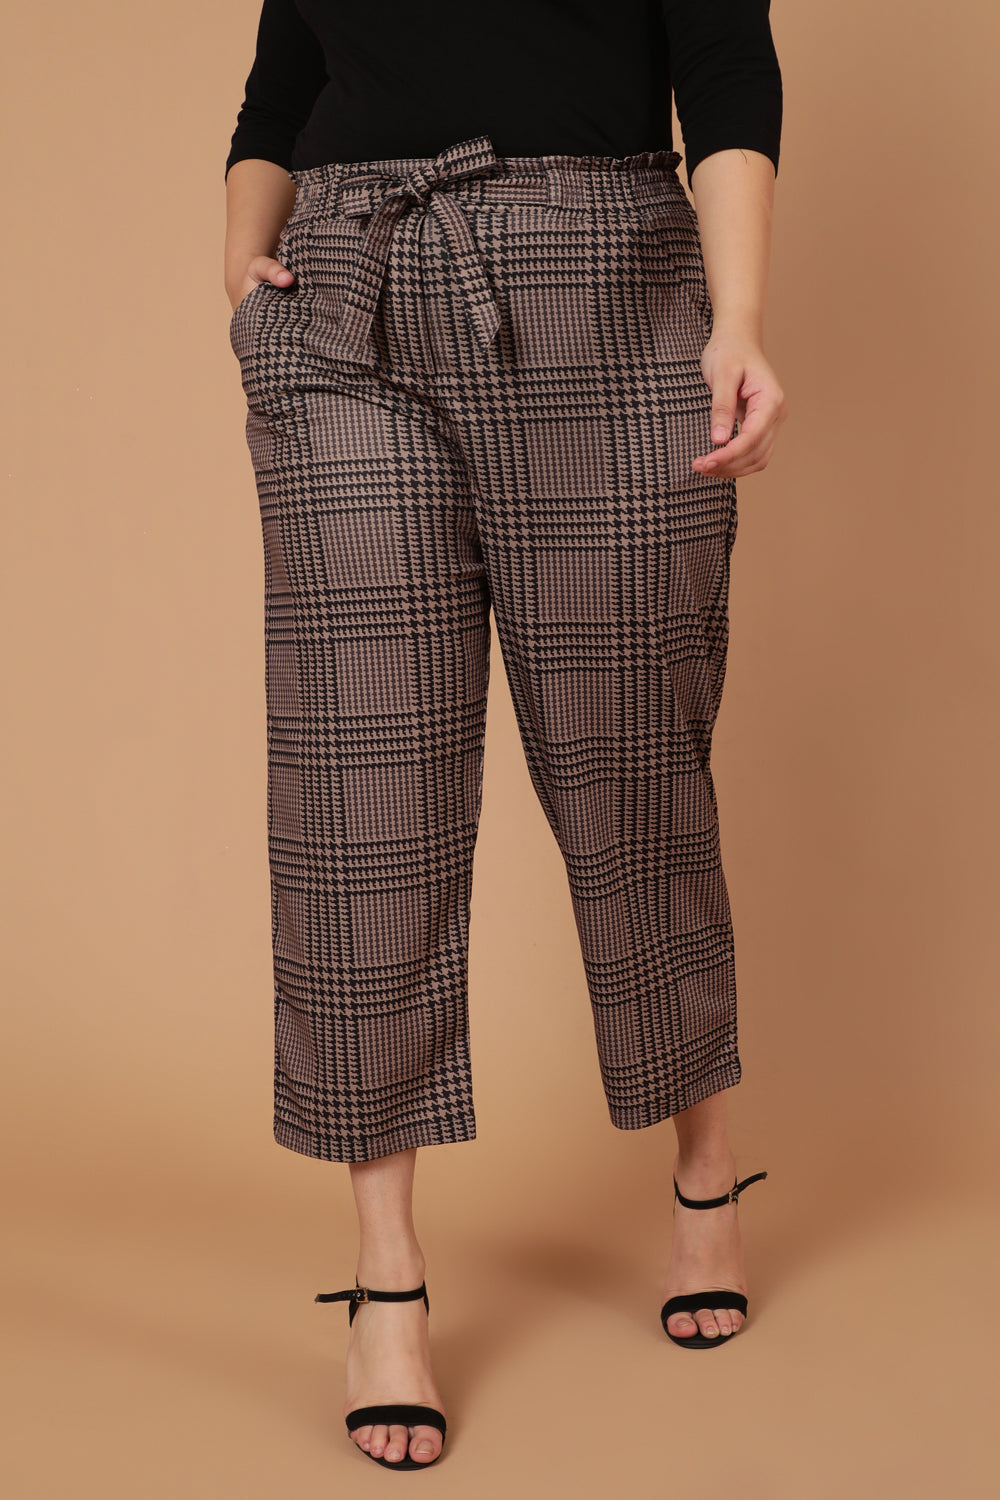 Buy Black High Rise Houndstooth Jeggings Online In India.